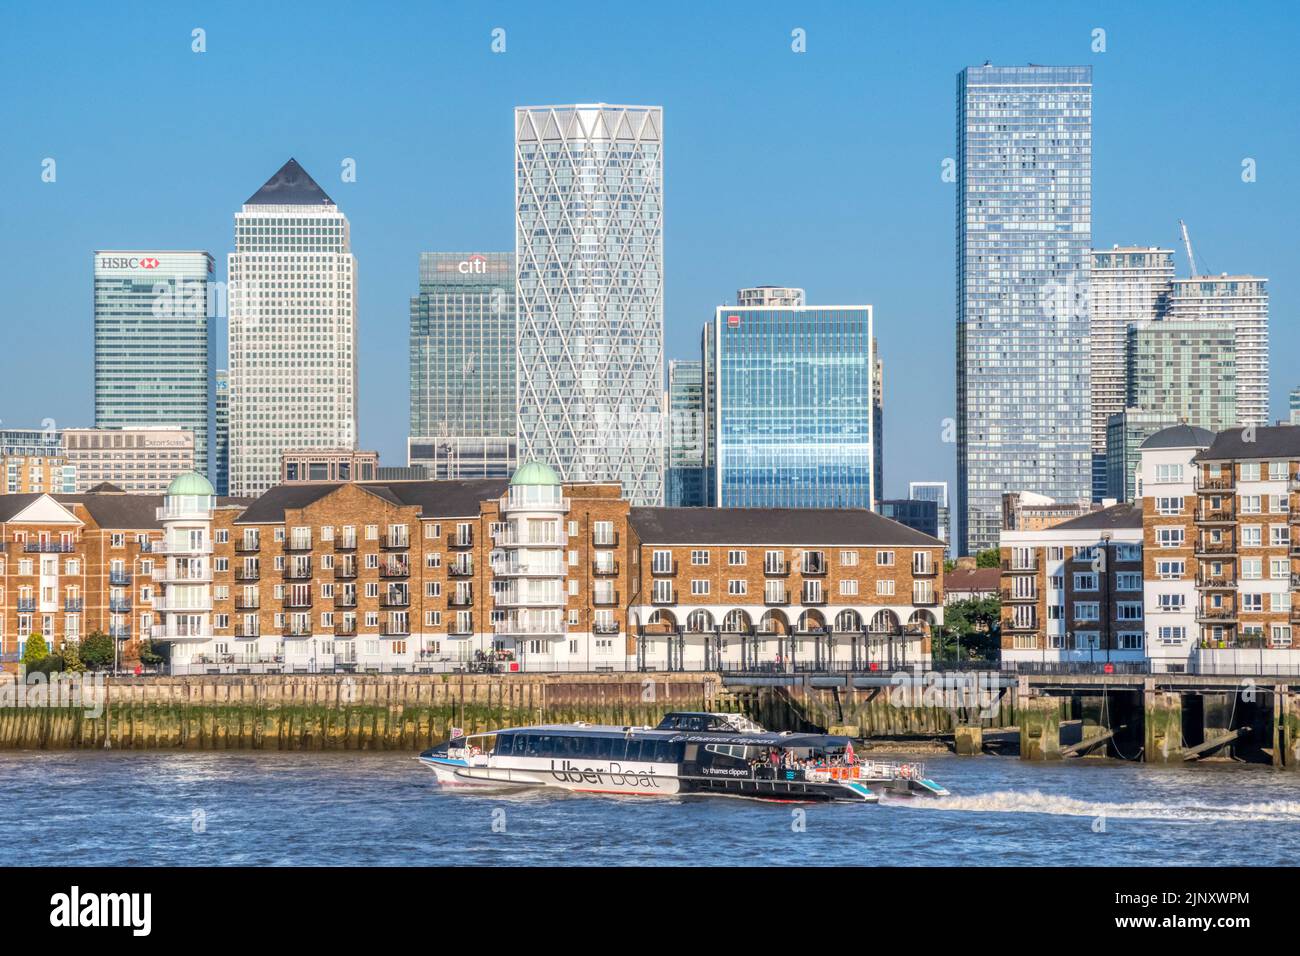 An Uber Boat by Thames Clippers passing the Rotherhithe Peninsula with Canary Wharf & the Isle of Dogs in the background. Stock Photo